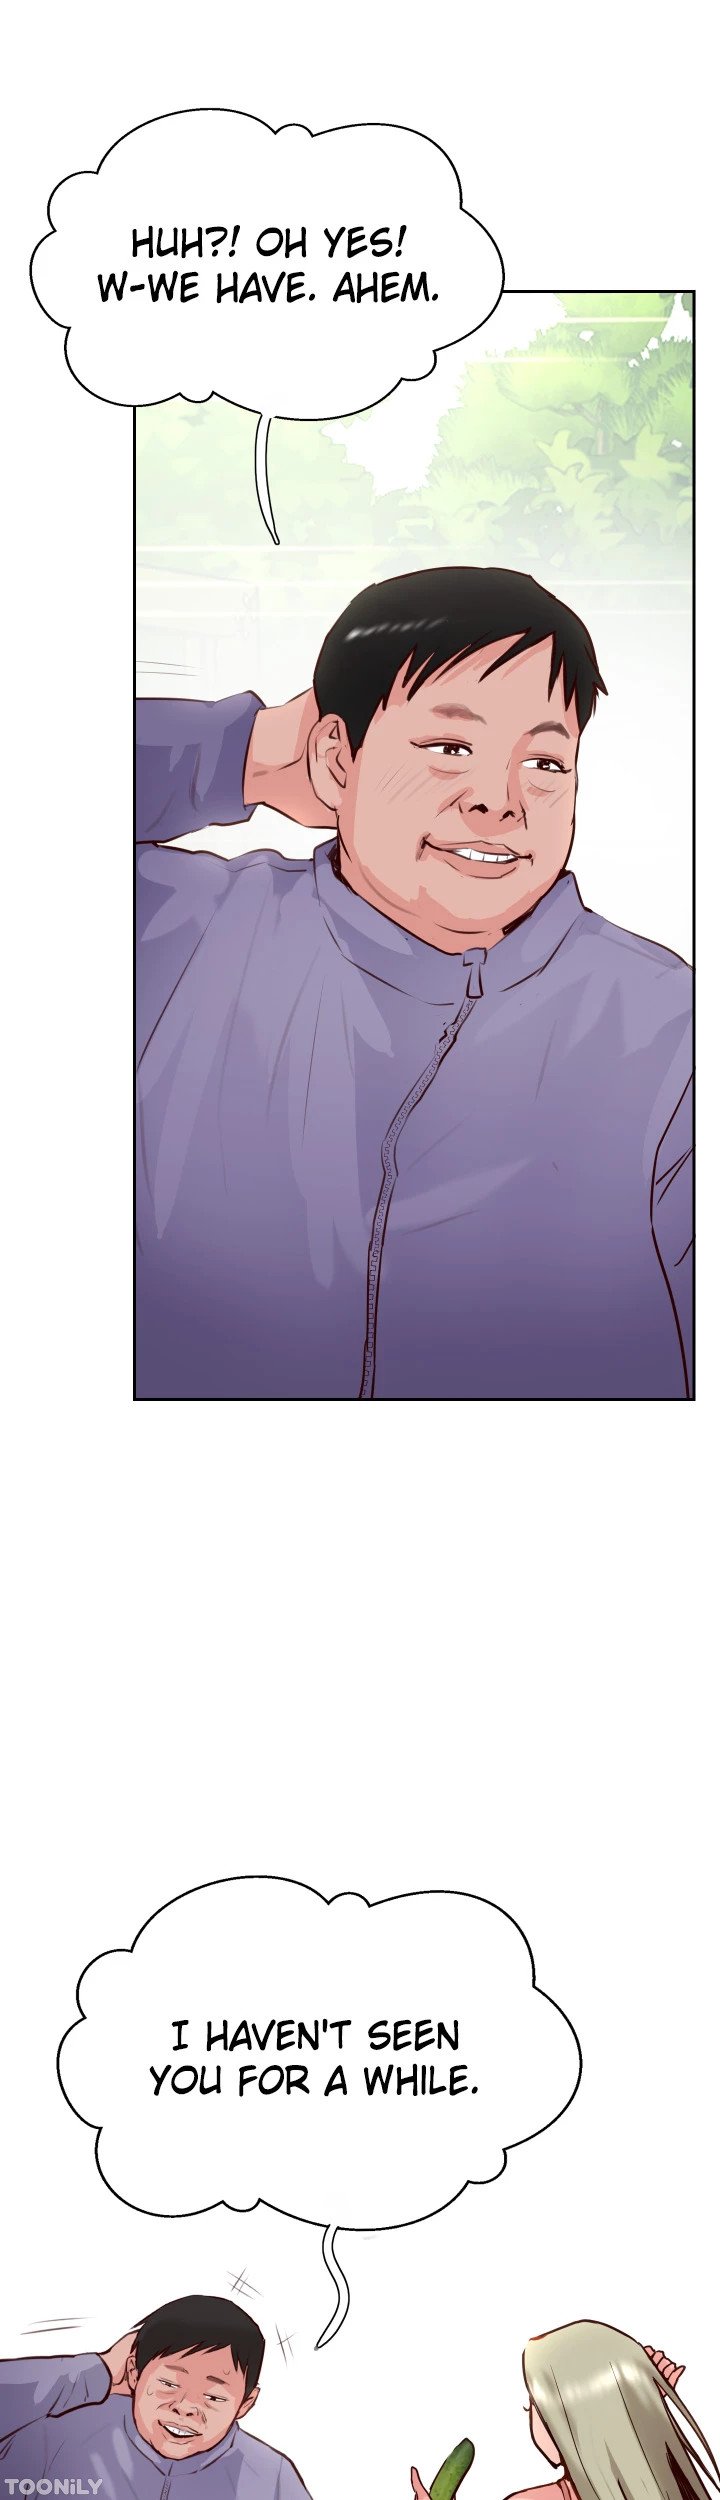 top-of-the-world-chap-33-32